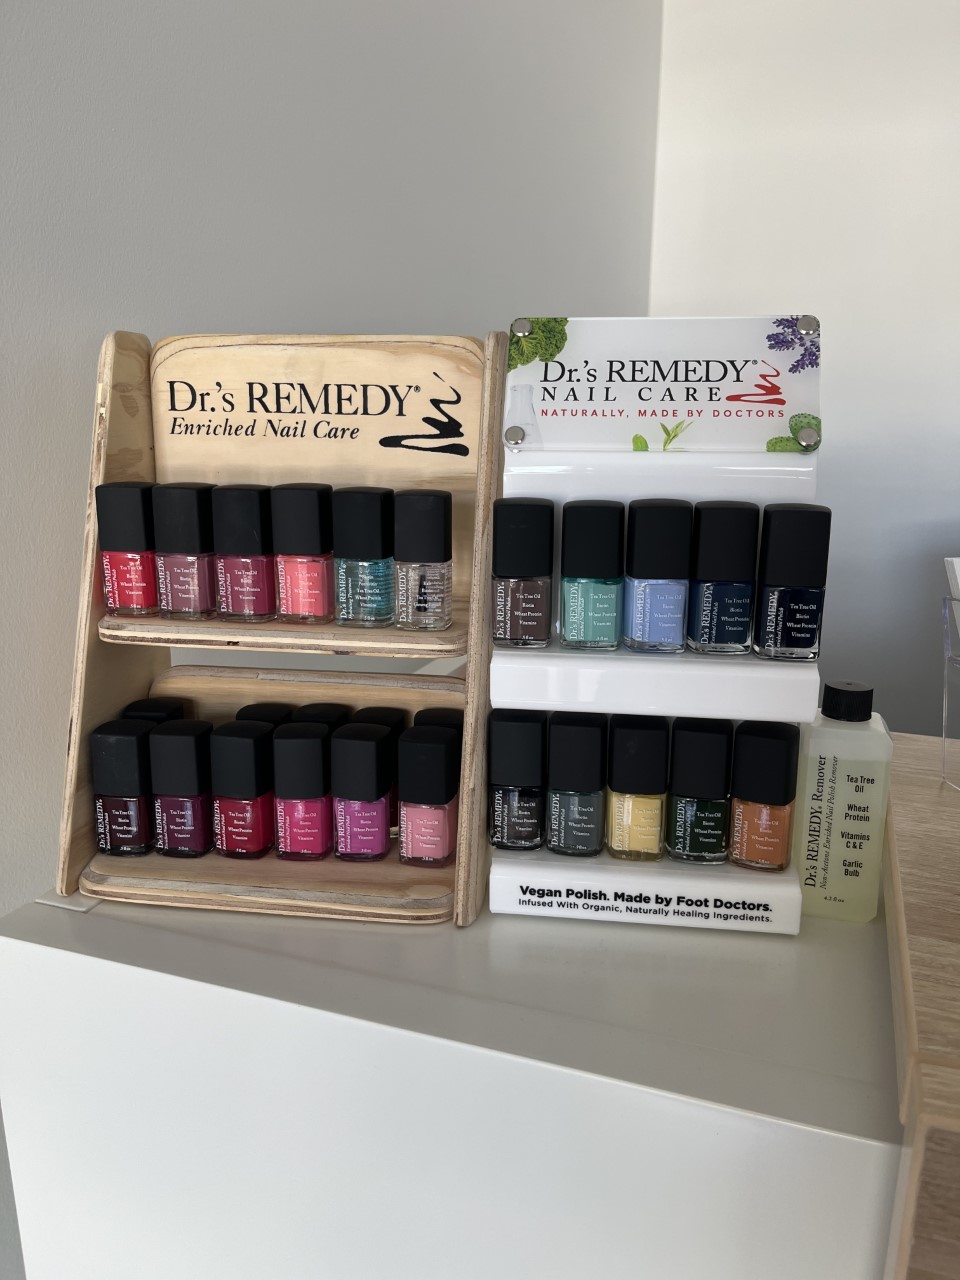 Selection of Drs remedy nail products